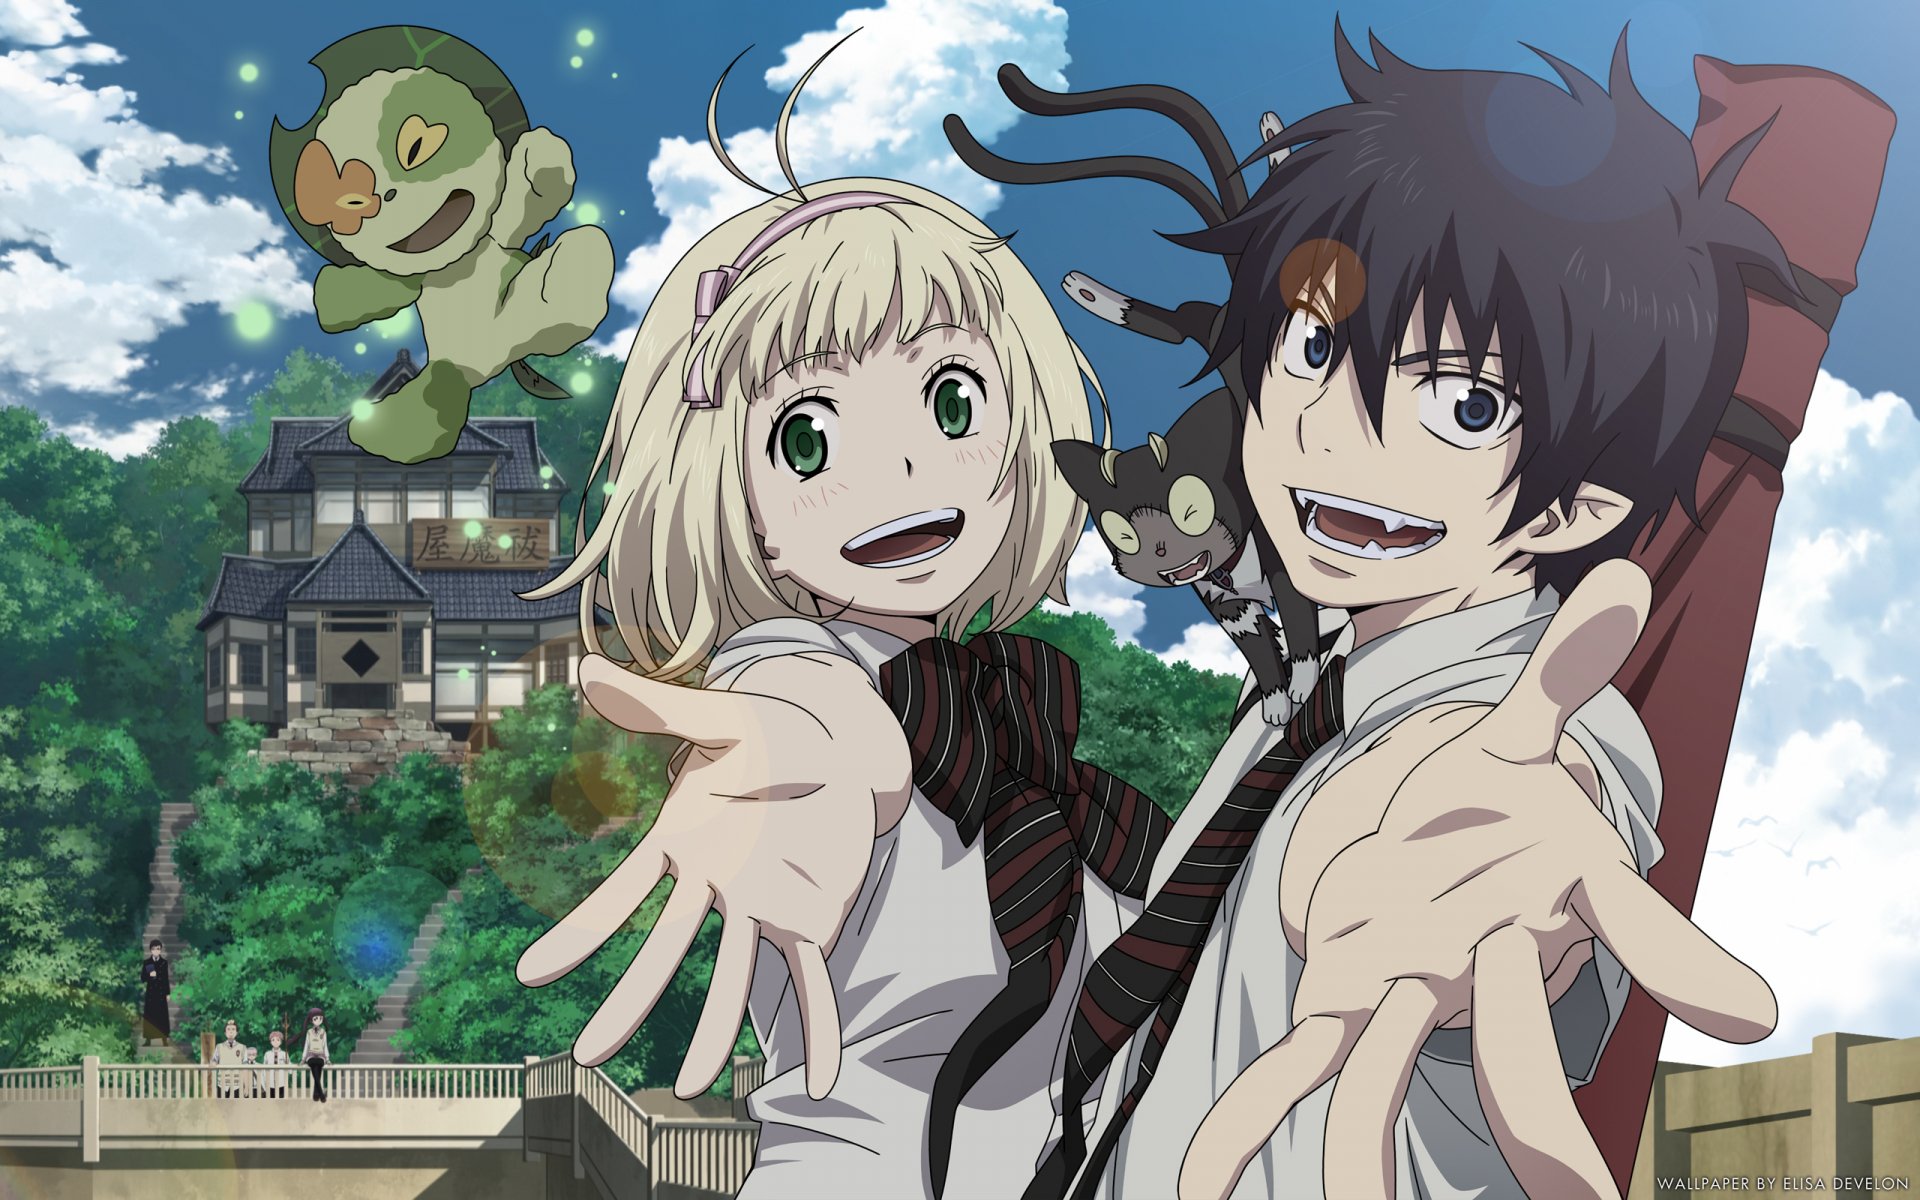 5. "Blue Exorcist" - wide 9